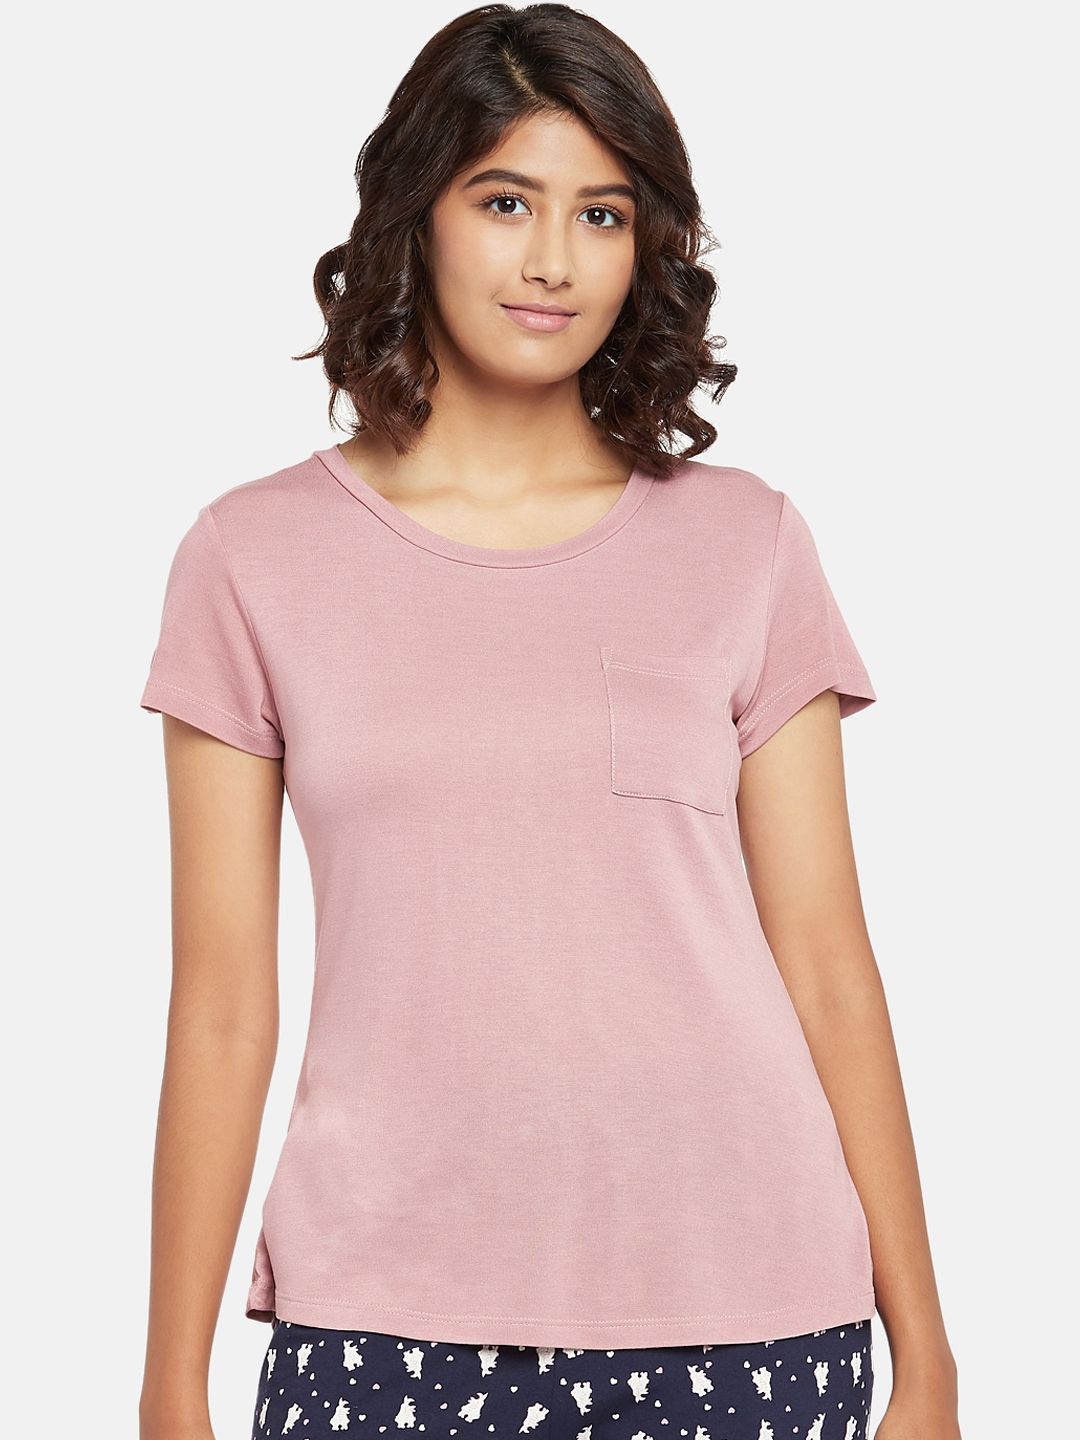 Dreamz by Pantaloons Women Pink Solid Lounge T-shirt Price in India